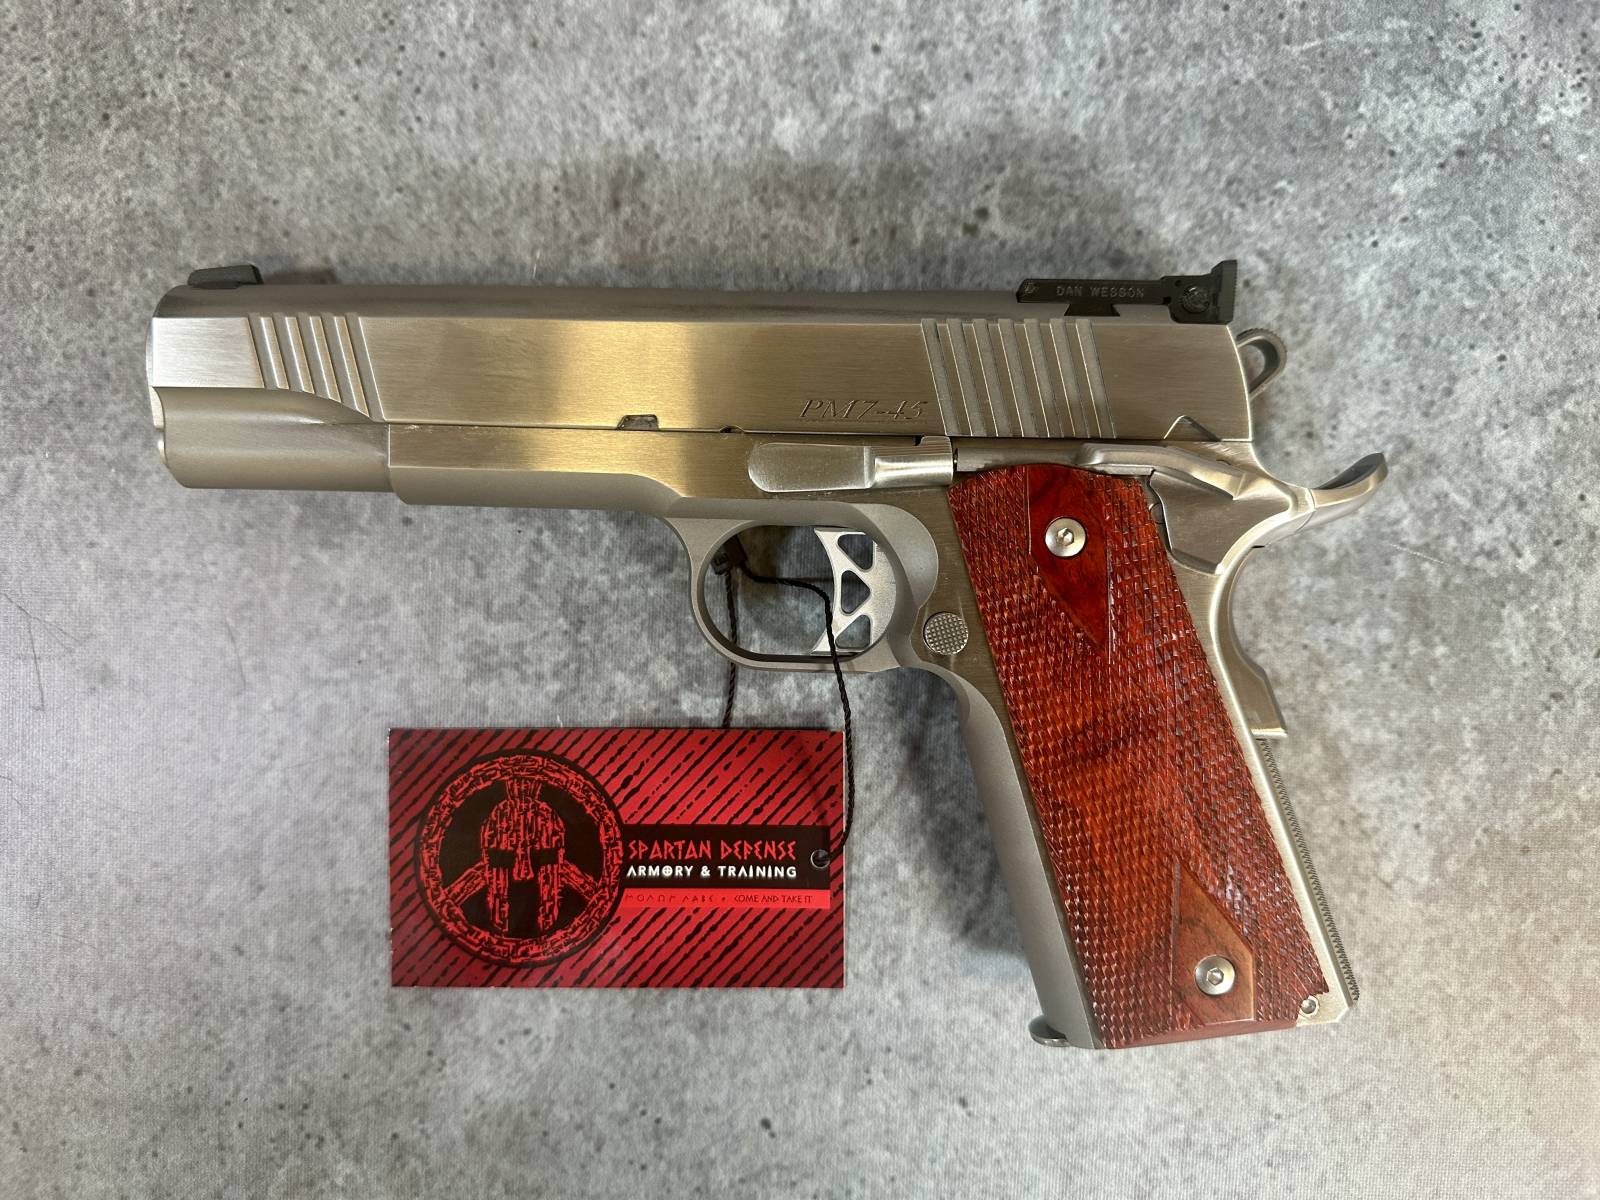 Dan Wesson Pointman Seven, Stainless Steel Frame, 45 ACP 8+1 5", 01900-img-3